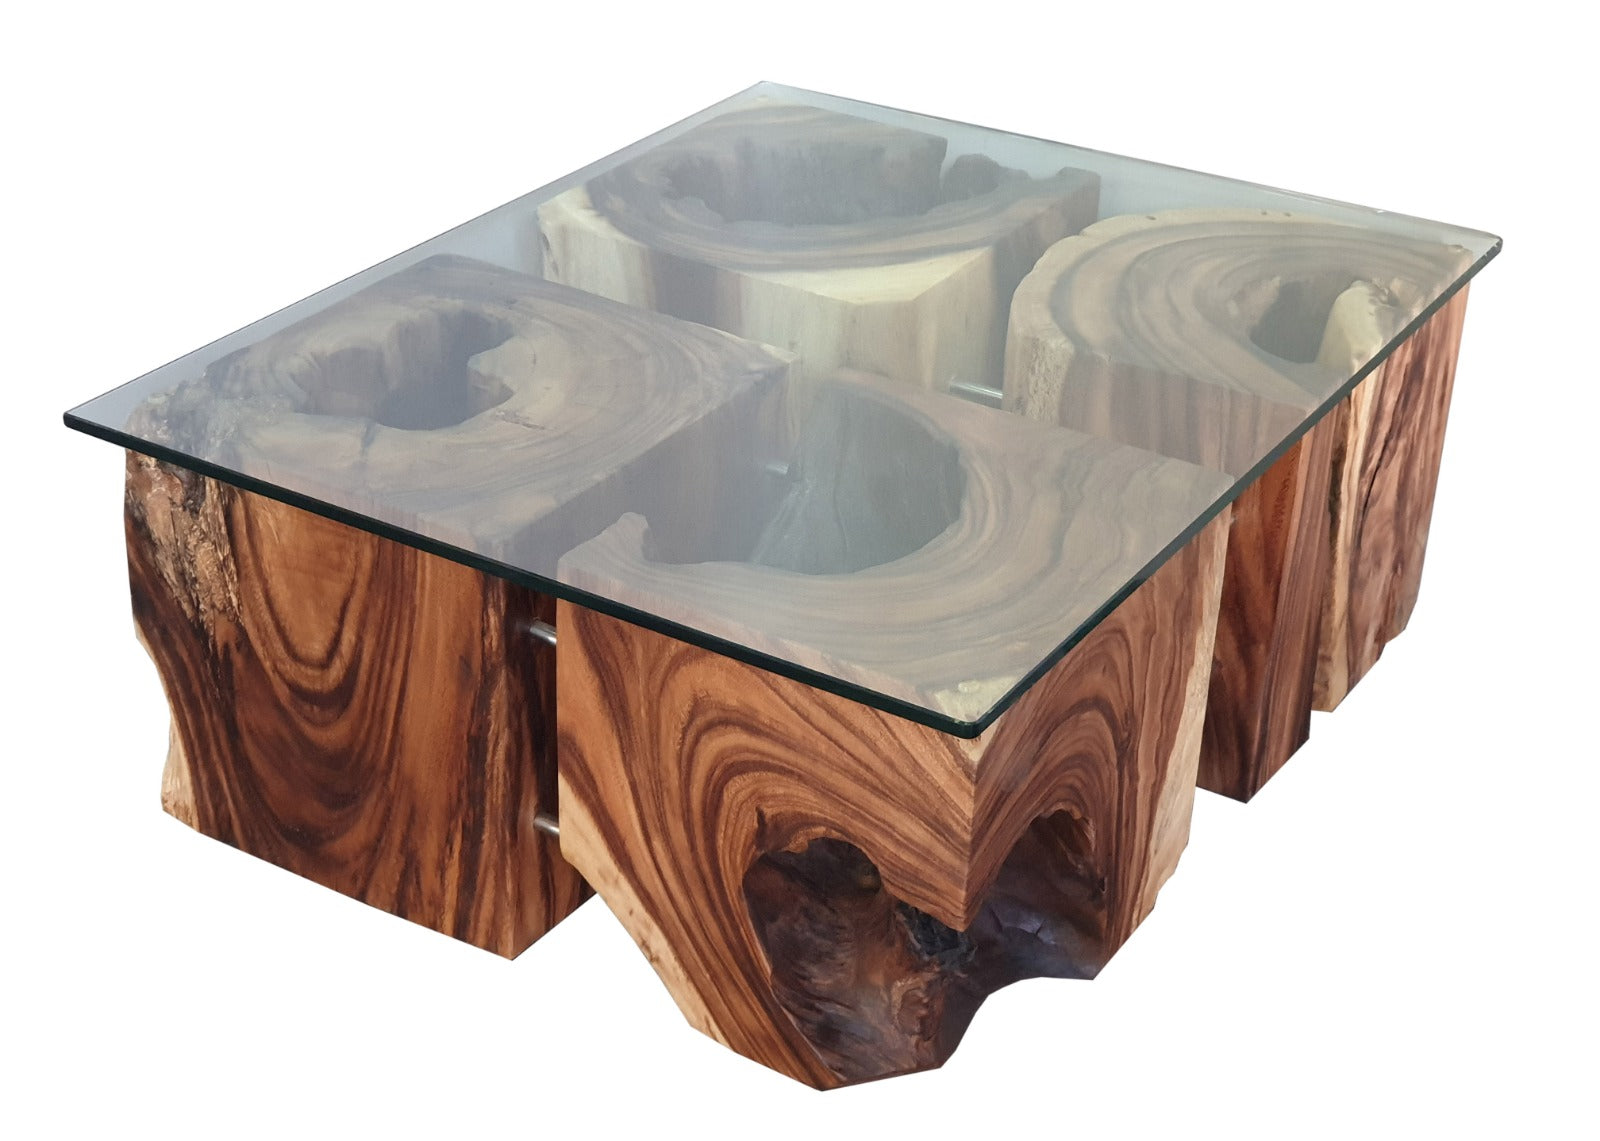 Cubed Coffee Table, Chamcha Wood With Glass Top